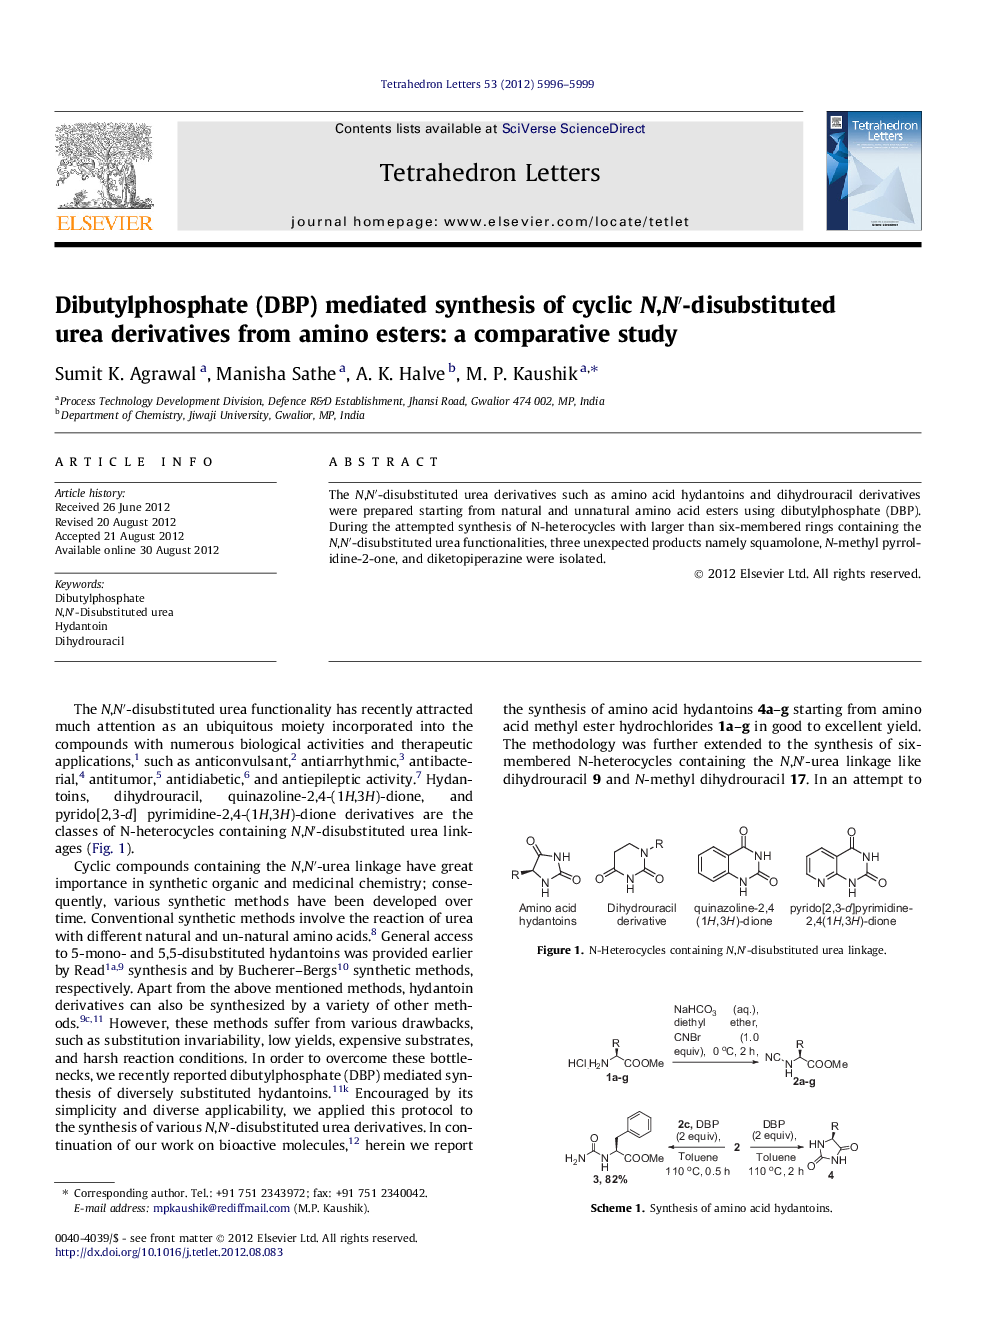 Dibutylphosphate (DBP) mediated synthesis of cyclic N,Nâ²-disubstituted urea derivatives from amino esters: a comparative study